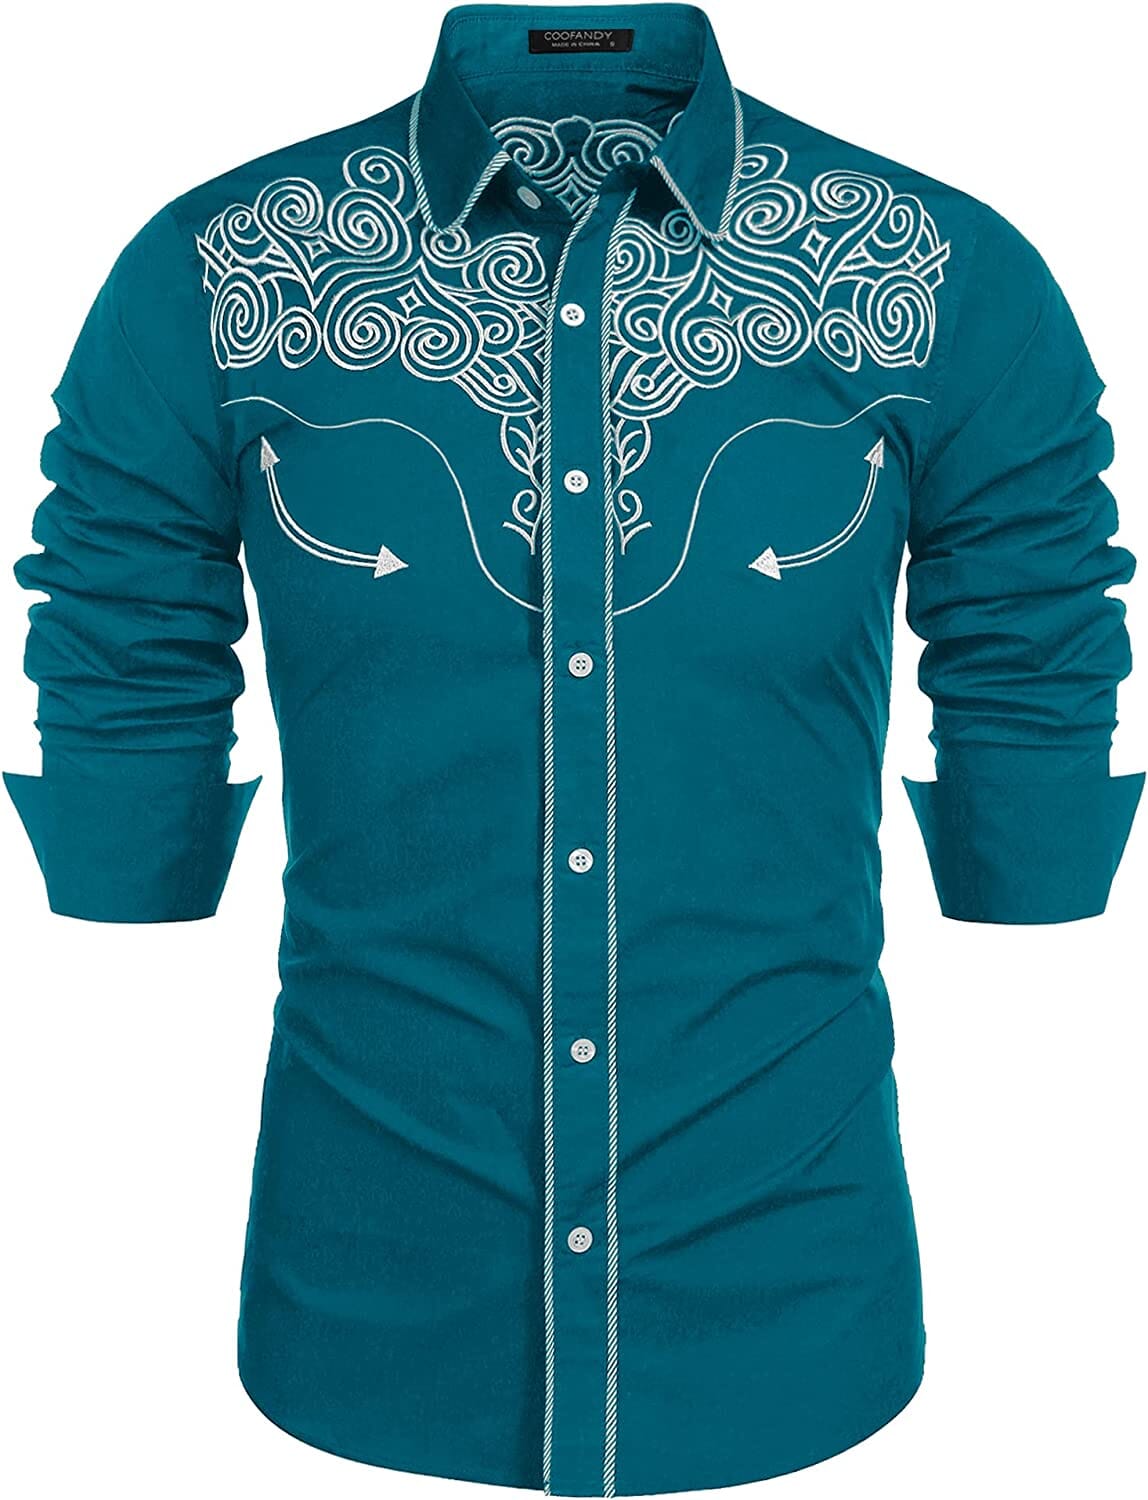 Embroidered Cowboy Button Down Shirt (US Only) Shirts COOFANDY Store Dark Blue S 